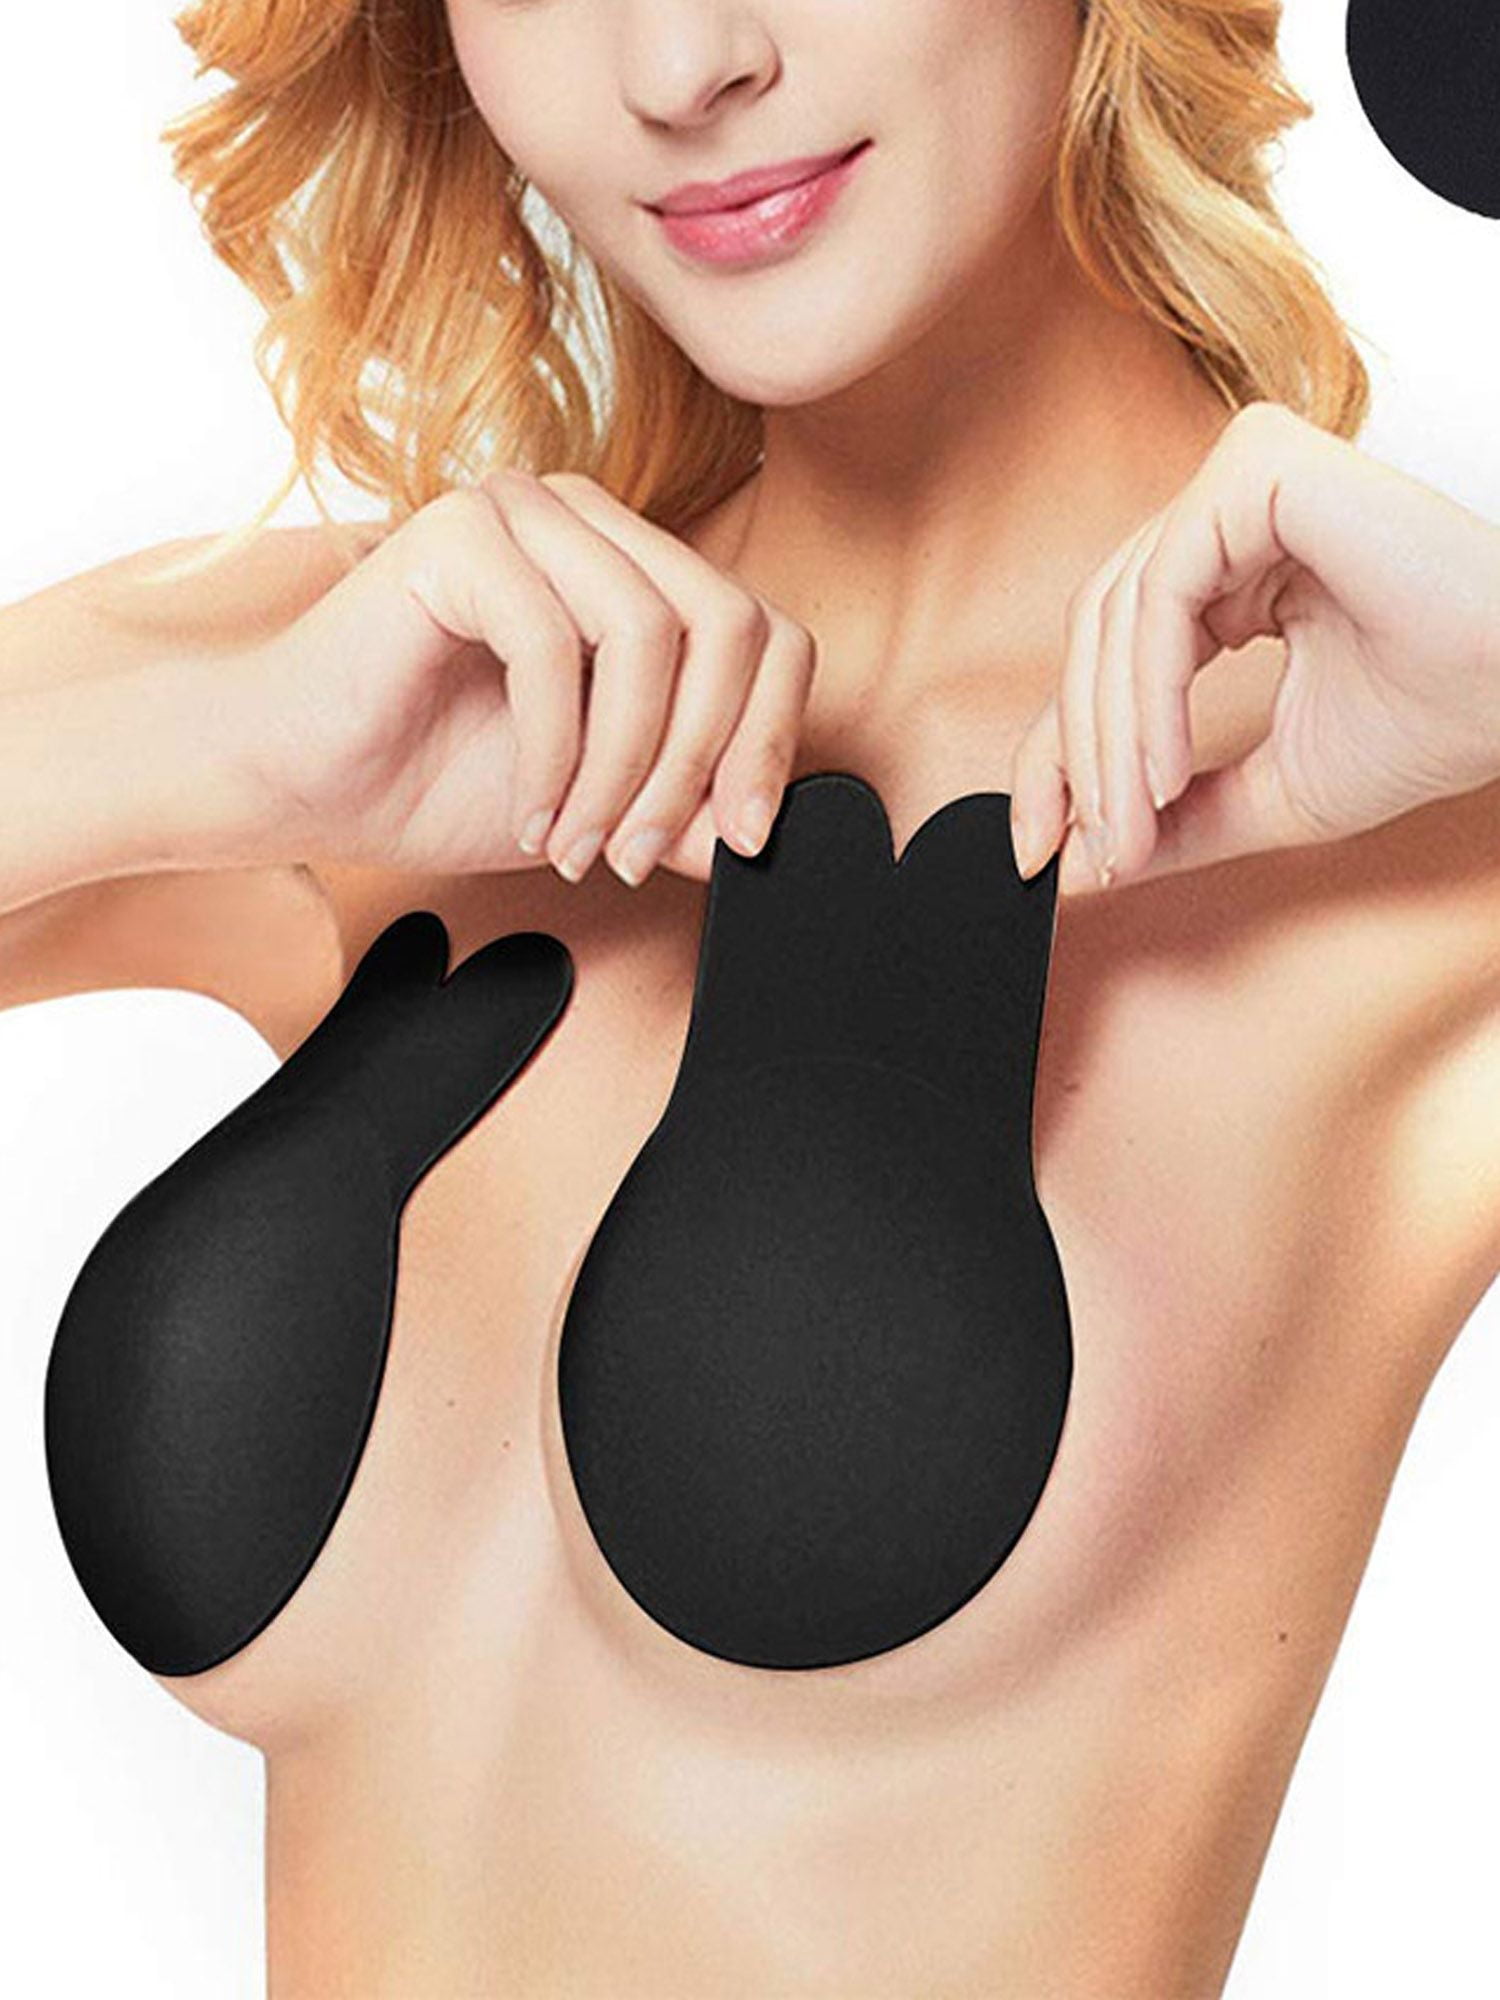 Women Push Up Bra Rabbit Ears Invisible Bra Lift Breast Nubra Self Adhesive Bras  Nipple Cover Stickers Strapless Backless Bra Pad From Aolongli, $1.36